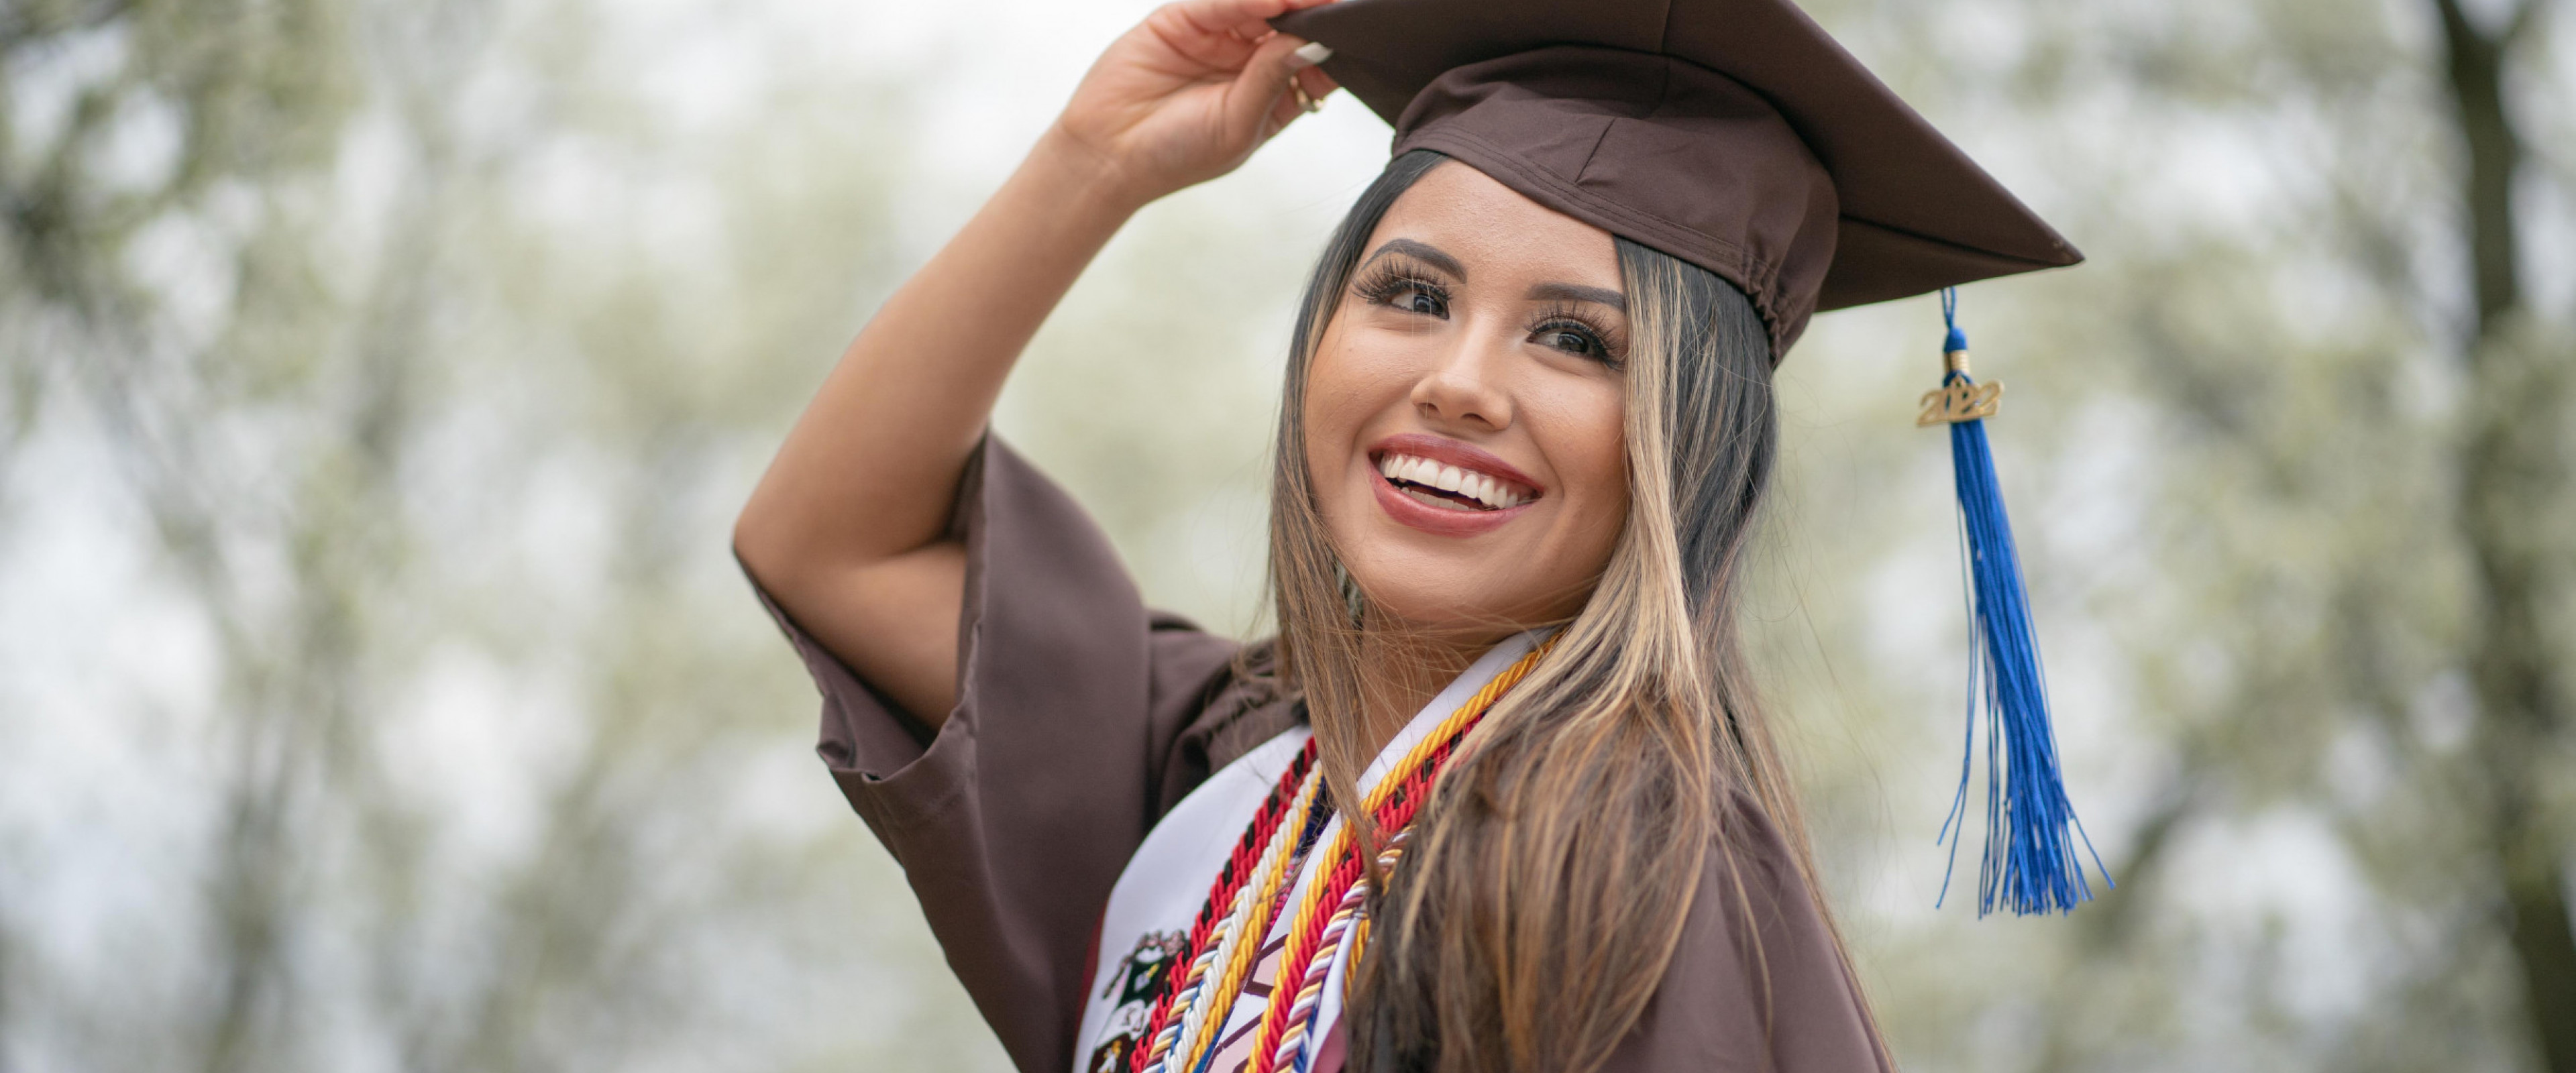 A smiling graduate wearing regalia and cords